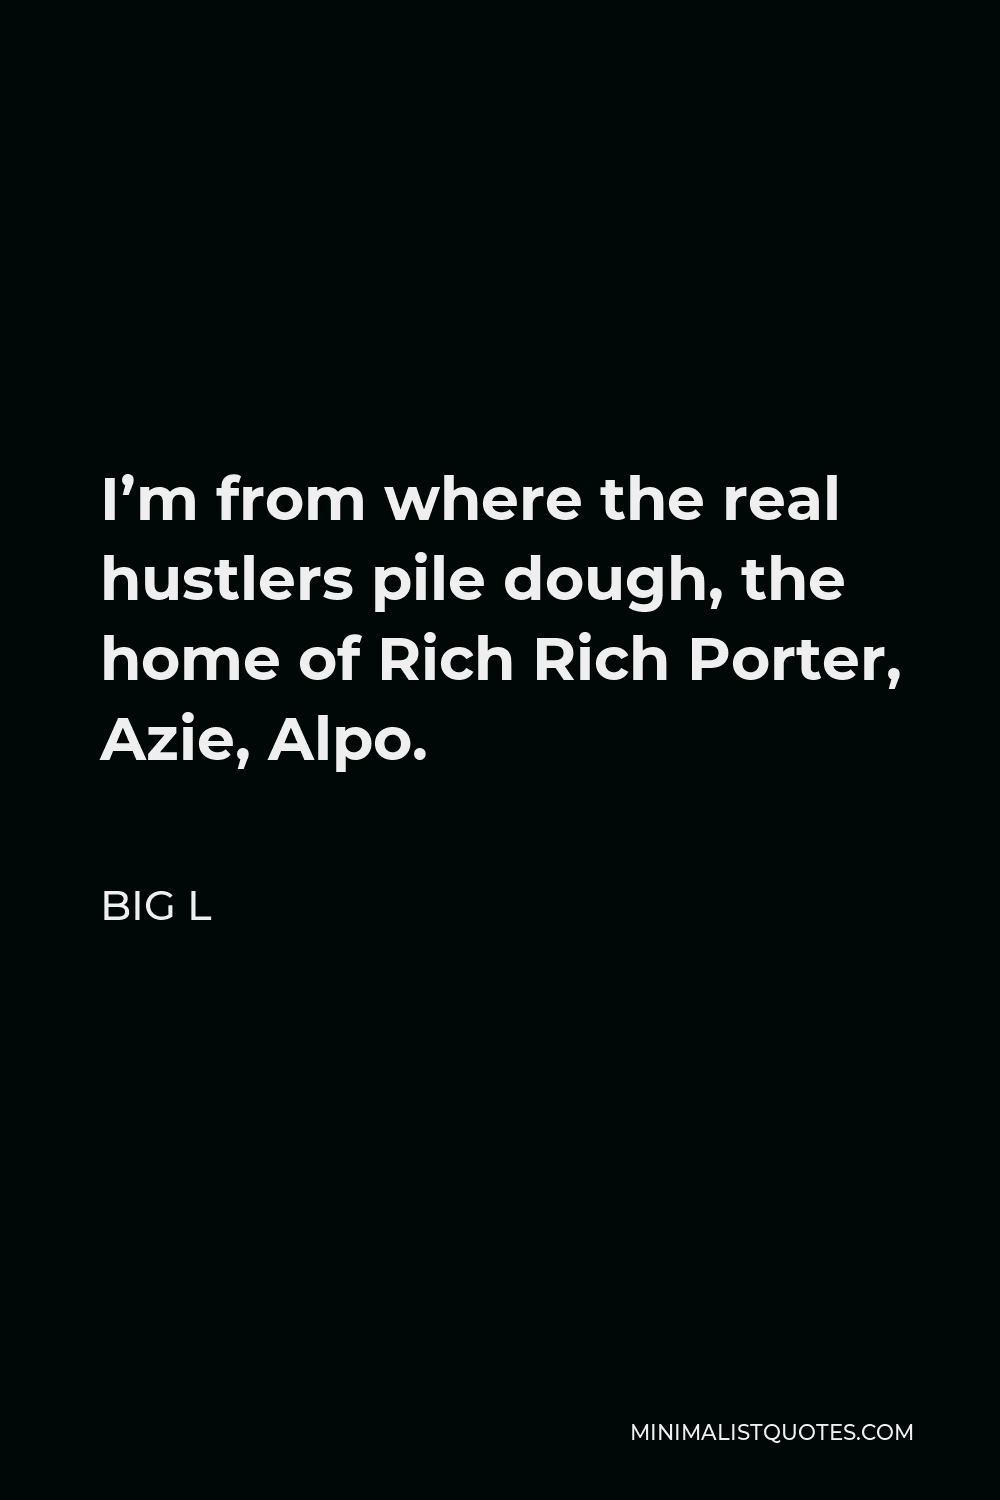 Big L Quote - I’m from where the real hustlers pile dough, the home of Rich Rich Porter, Azie, Alpo.